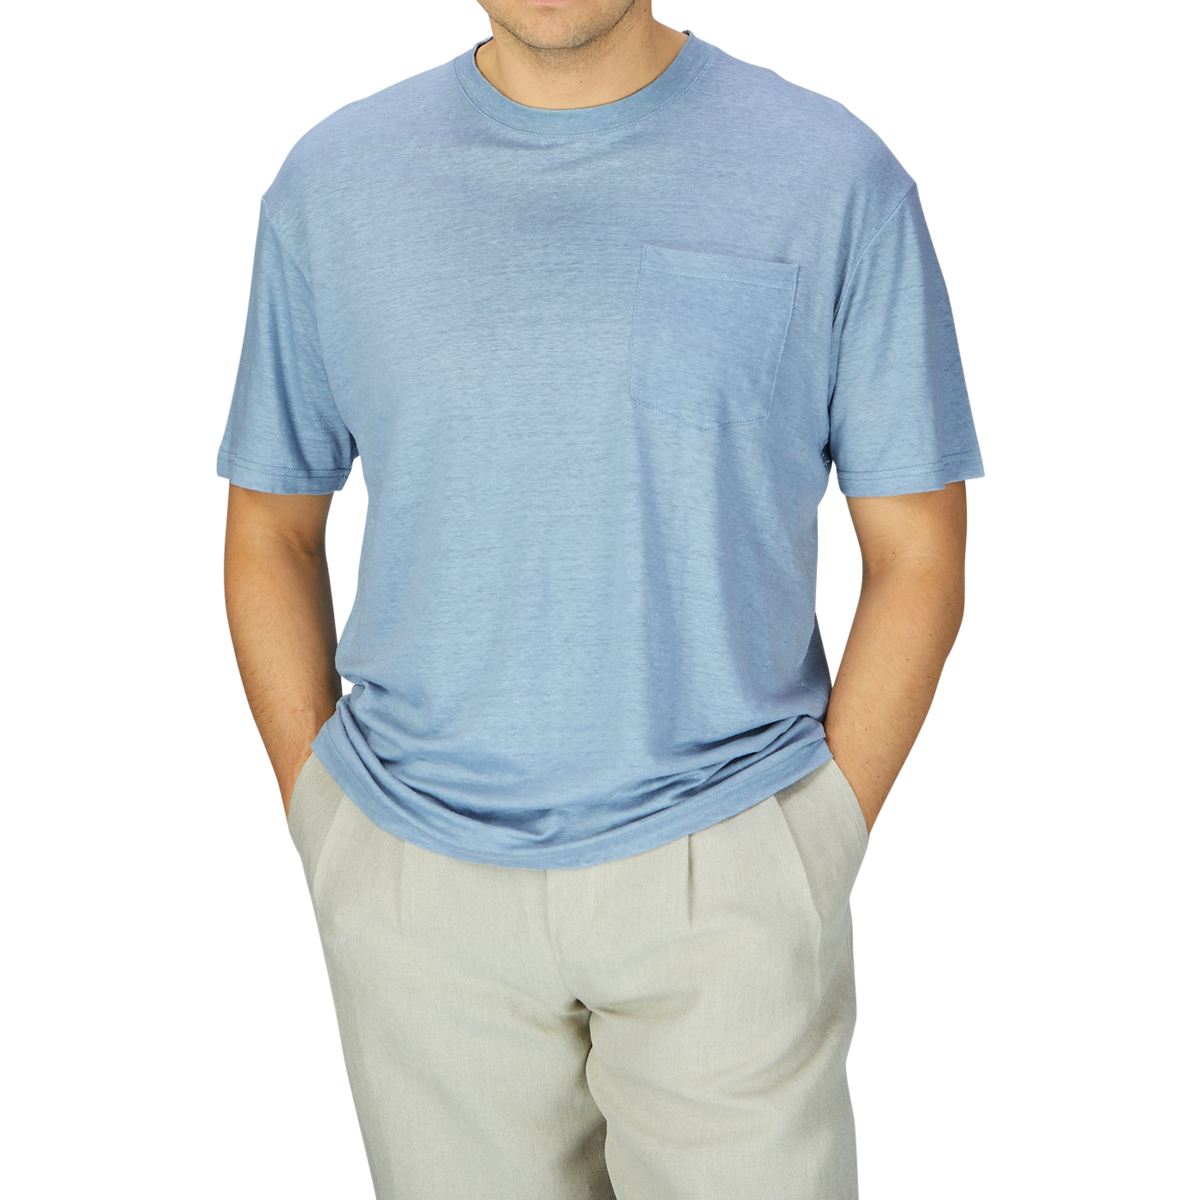 A man in a De Bonne Facture Smoke Blue Linen Jersey Oversized T-shirt and beige pants, from the chest down to the thighs, against a gray background.